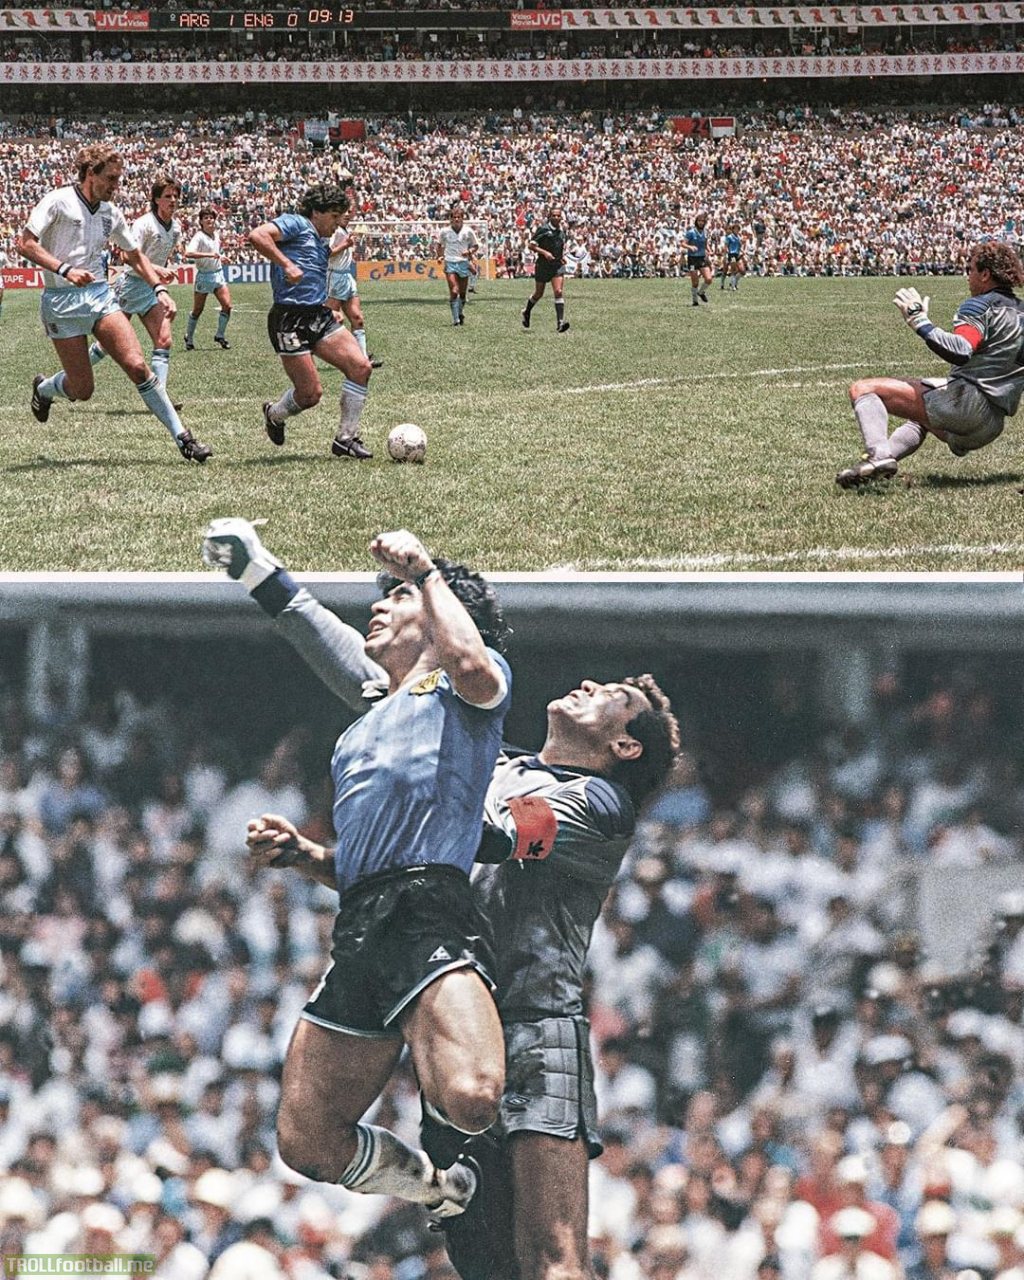 OTD June 22nd 1986, 35 years ago Diego Maradona scored the 2 most iconic goals in history in a World Cup Quarter Final vs England. The “Goal of the Century” and the “Hand of God”, both goals came just 4 minutes apart.